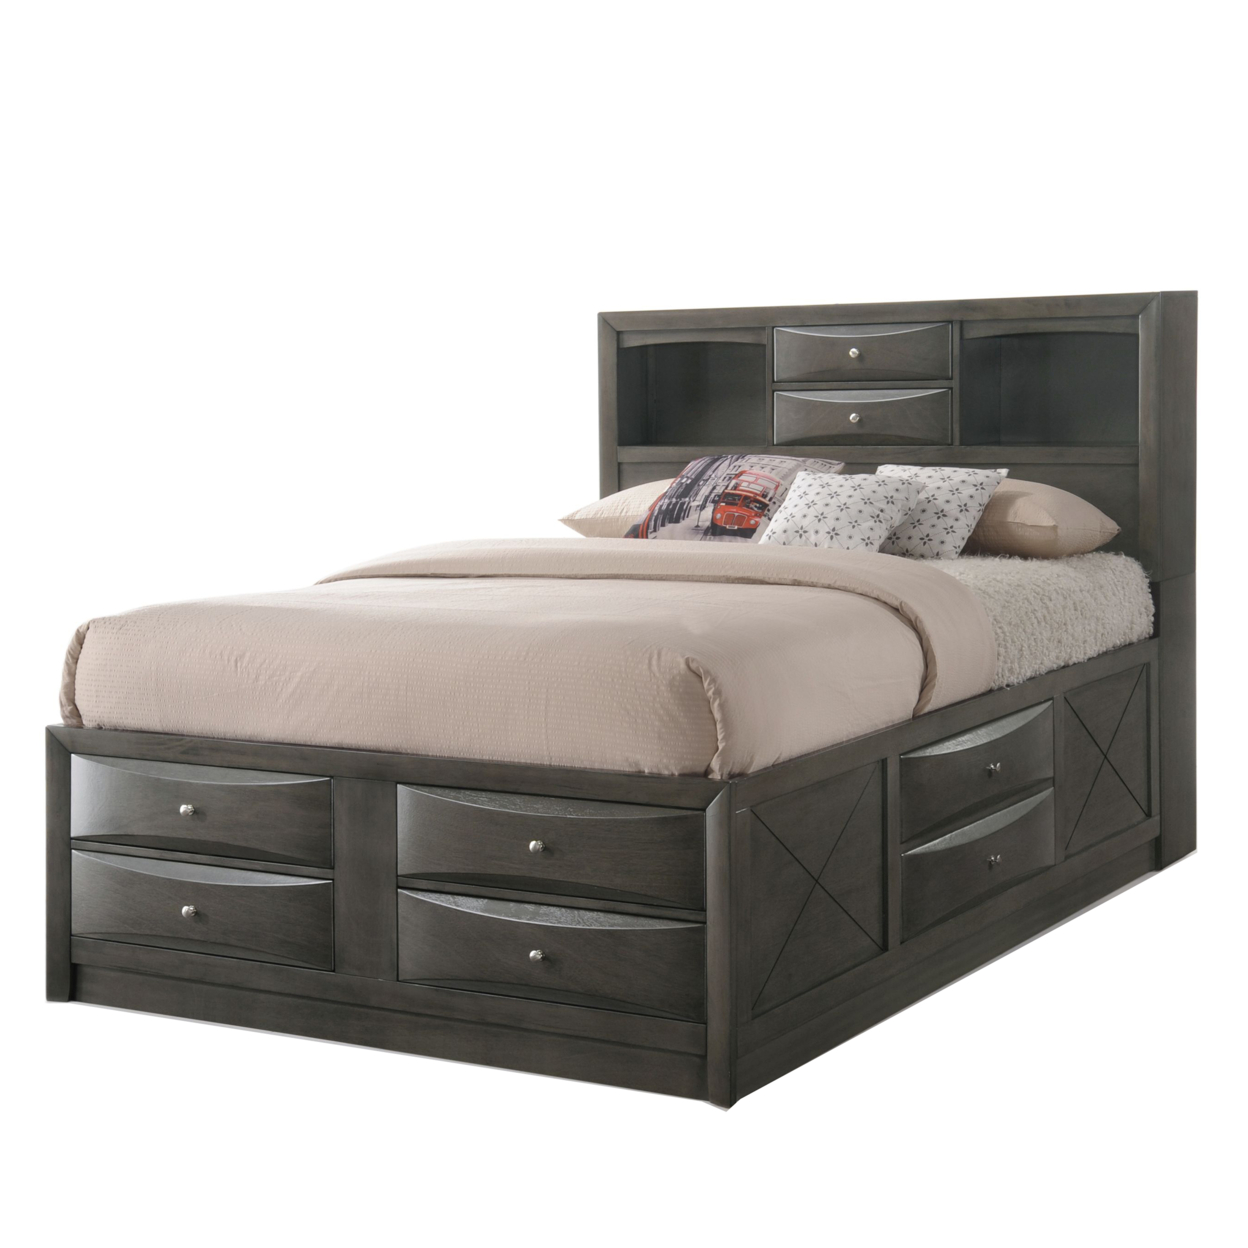 Panel Design Full Size Bed With Bookcase And Drawers, Taupe Brown - Saltoro Sherpi